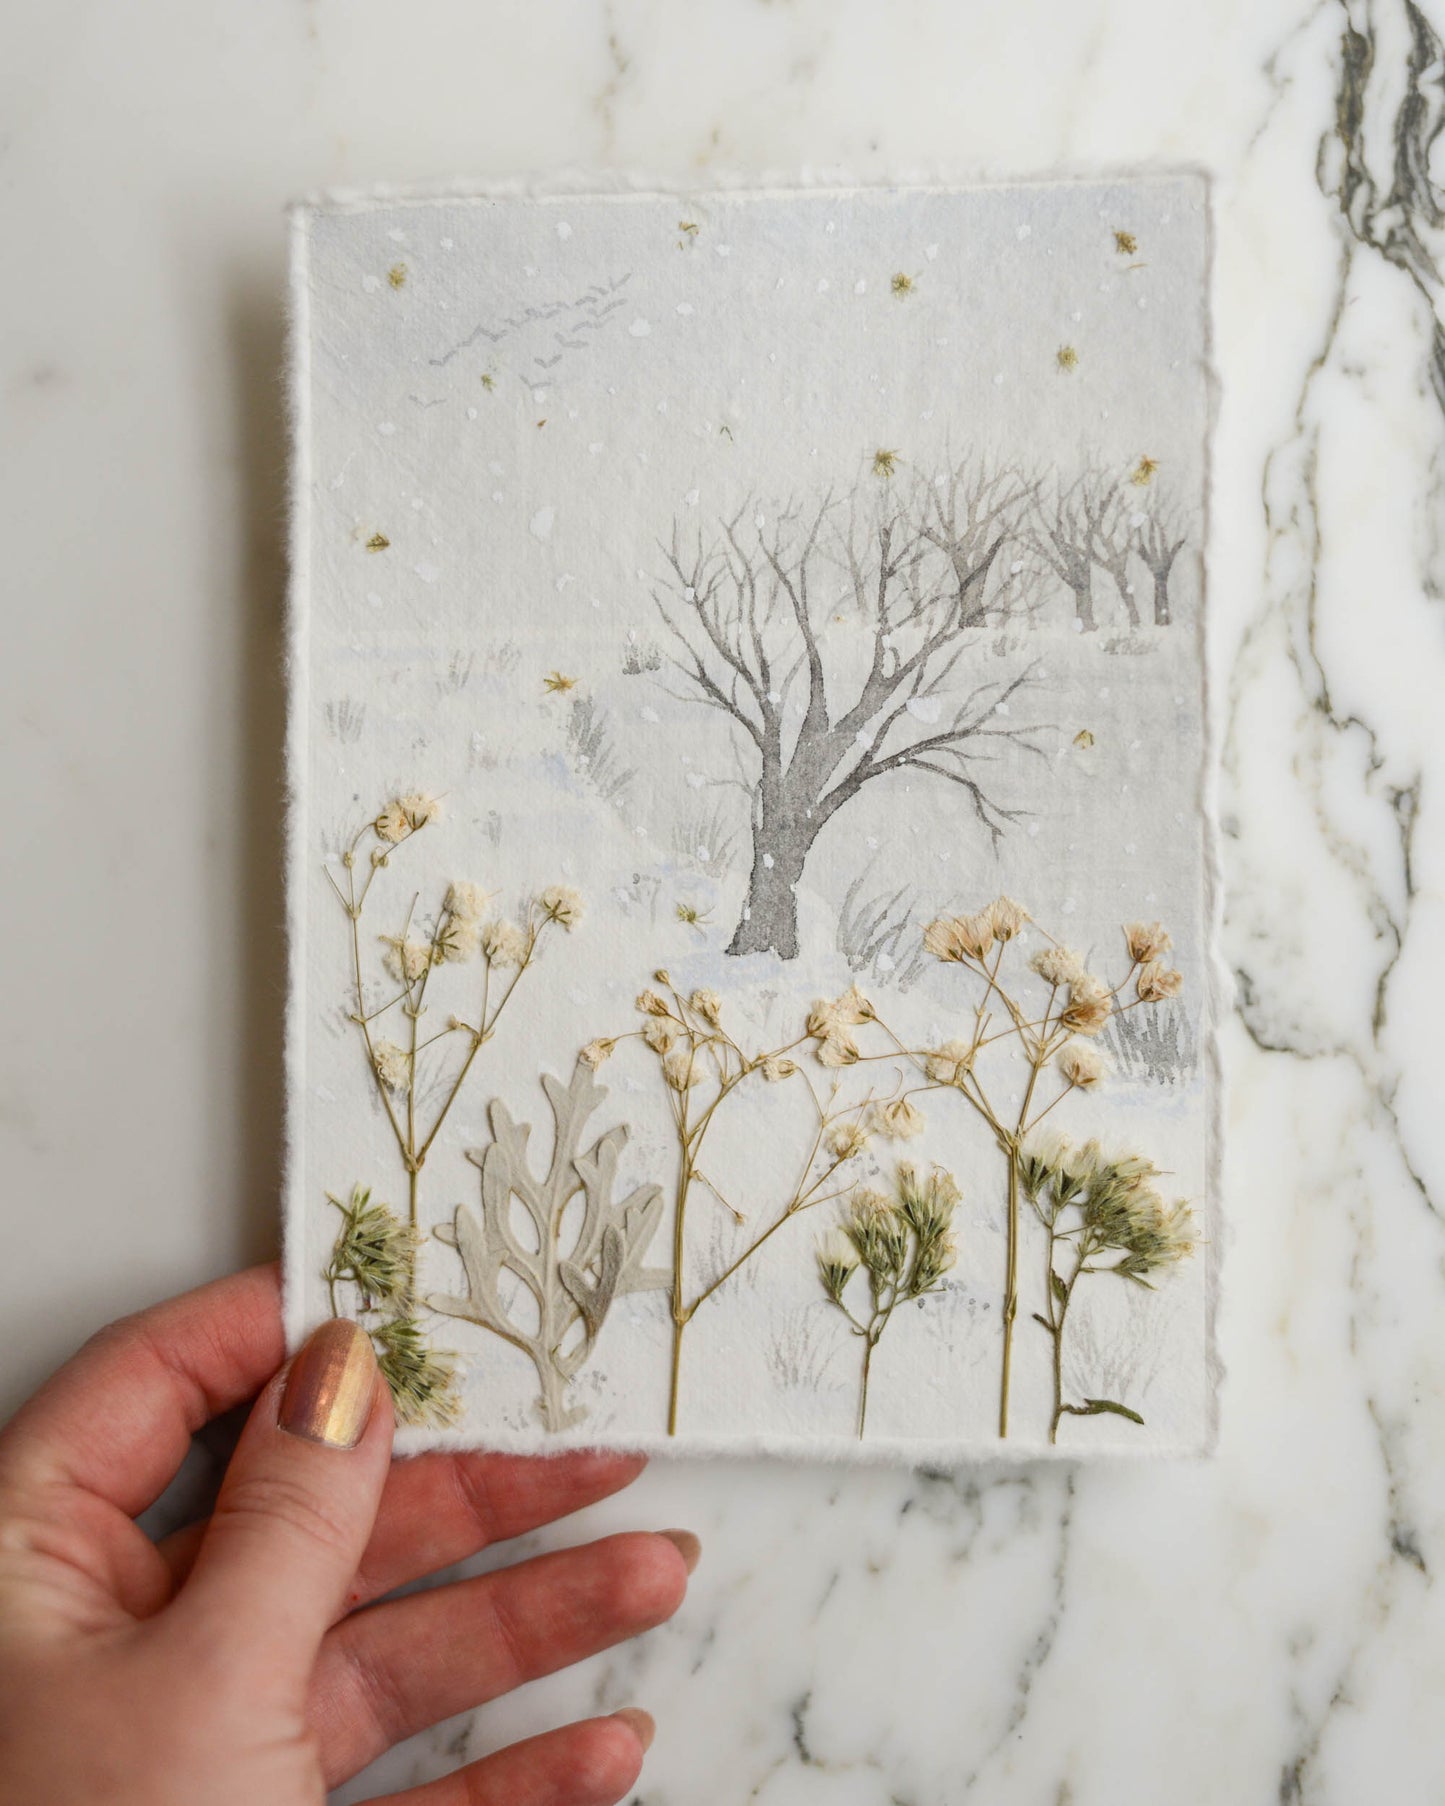 Snow Day: Frozen Pond - Original Artwork, 5x7" Watercolor and Pressed Flowers